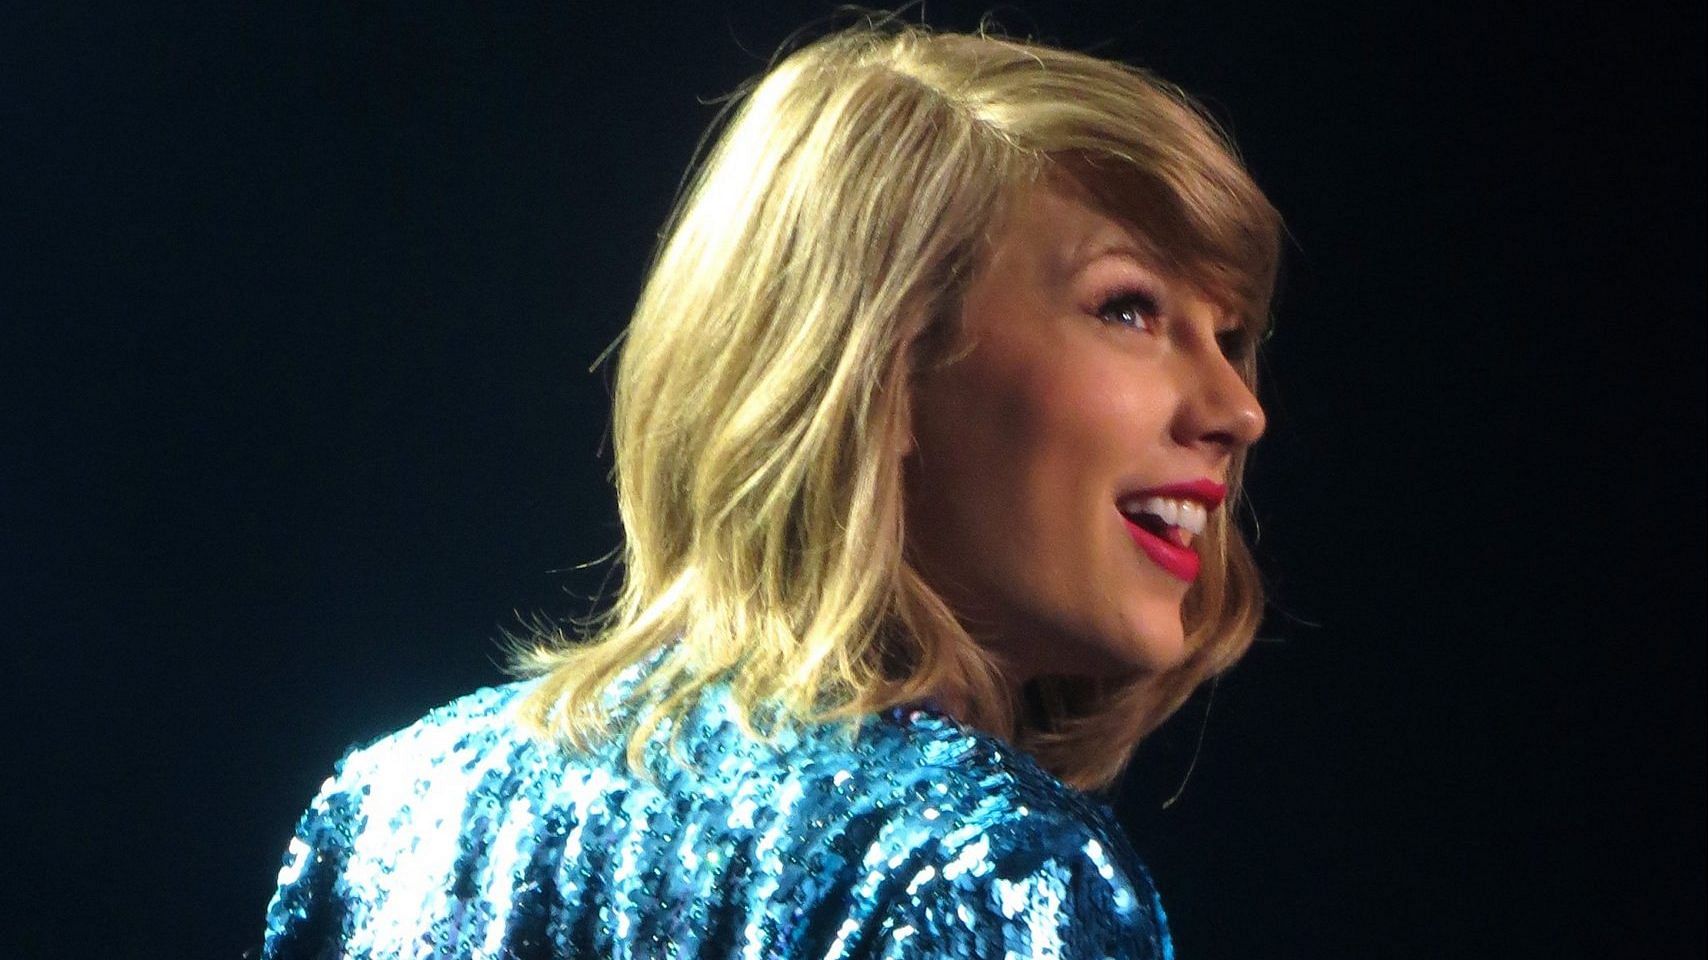 I'm a Taylor Swift fan and I don't need male approval to enjoy her music